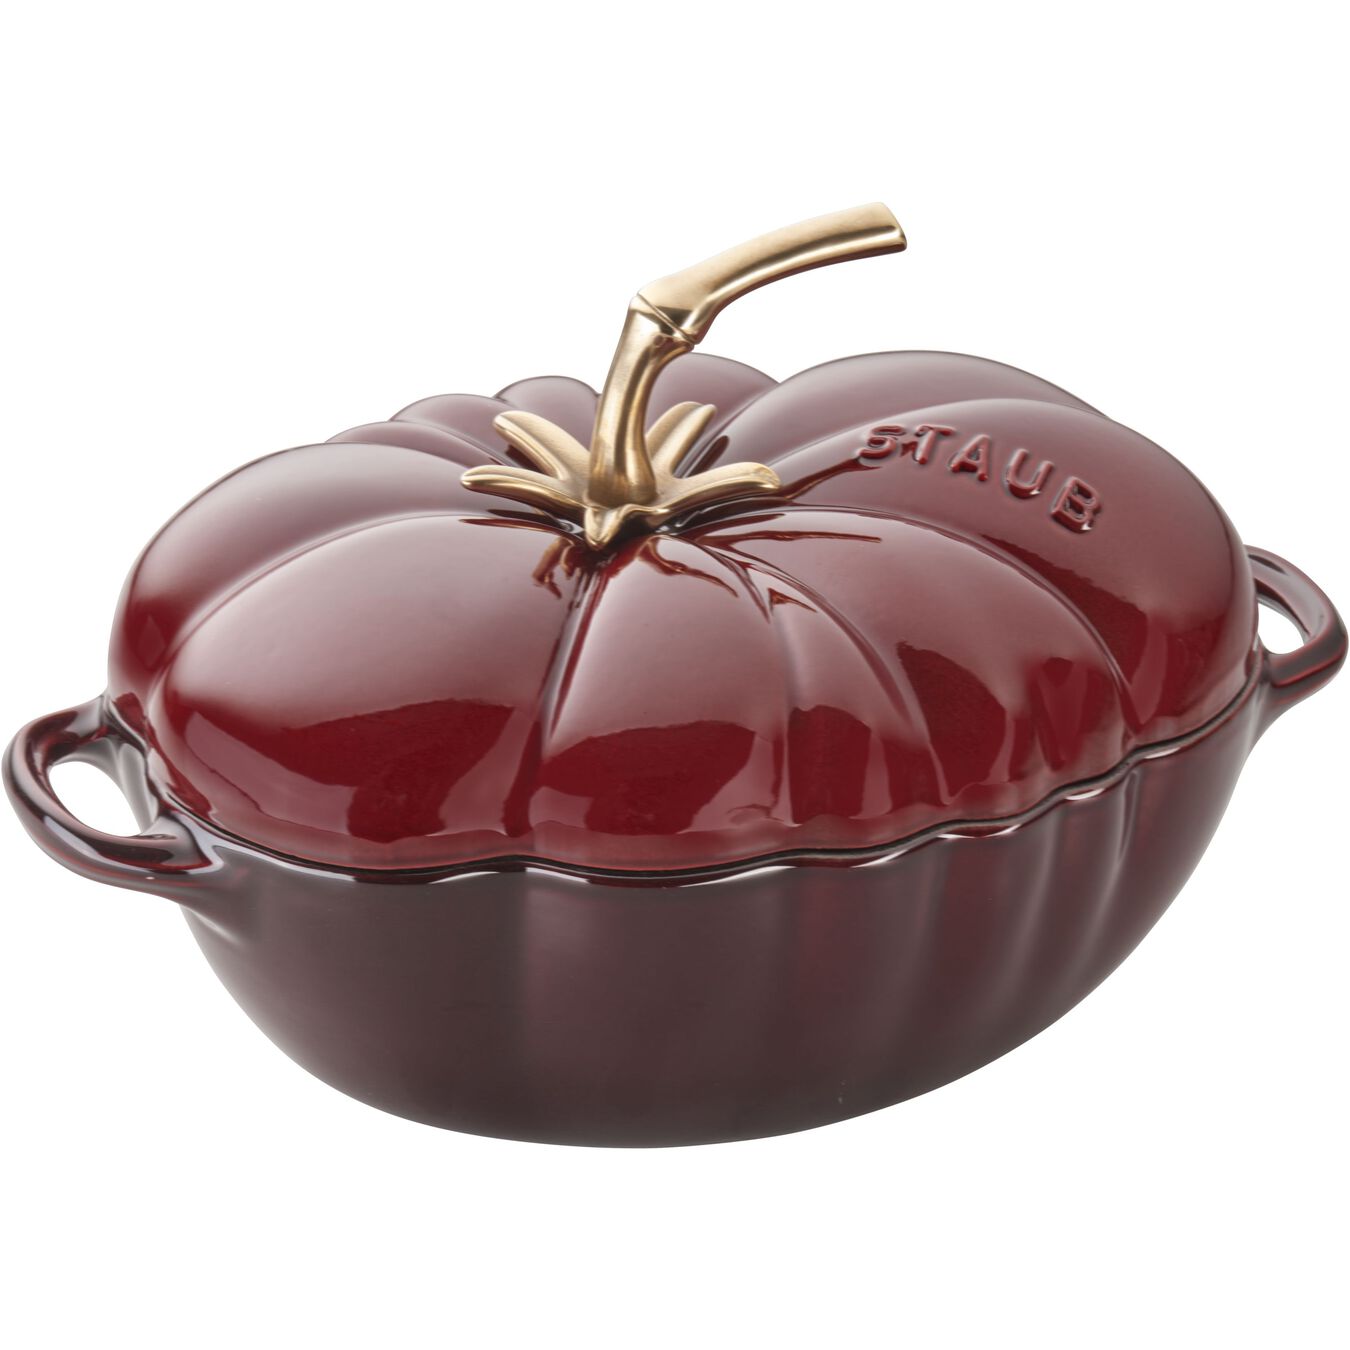 2.8 l cast iron tomato Cocotte, grenadine-red - Visual Imperfections,,large 4